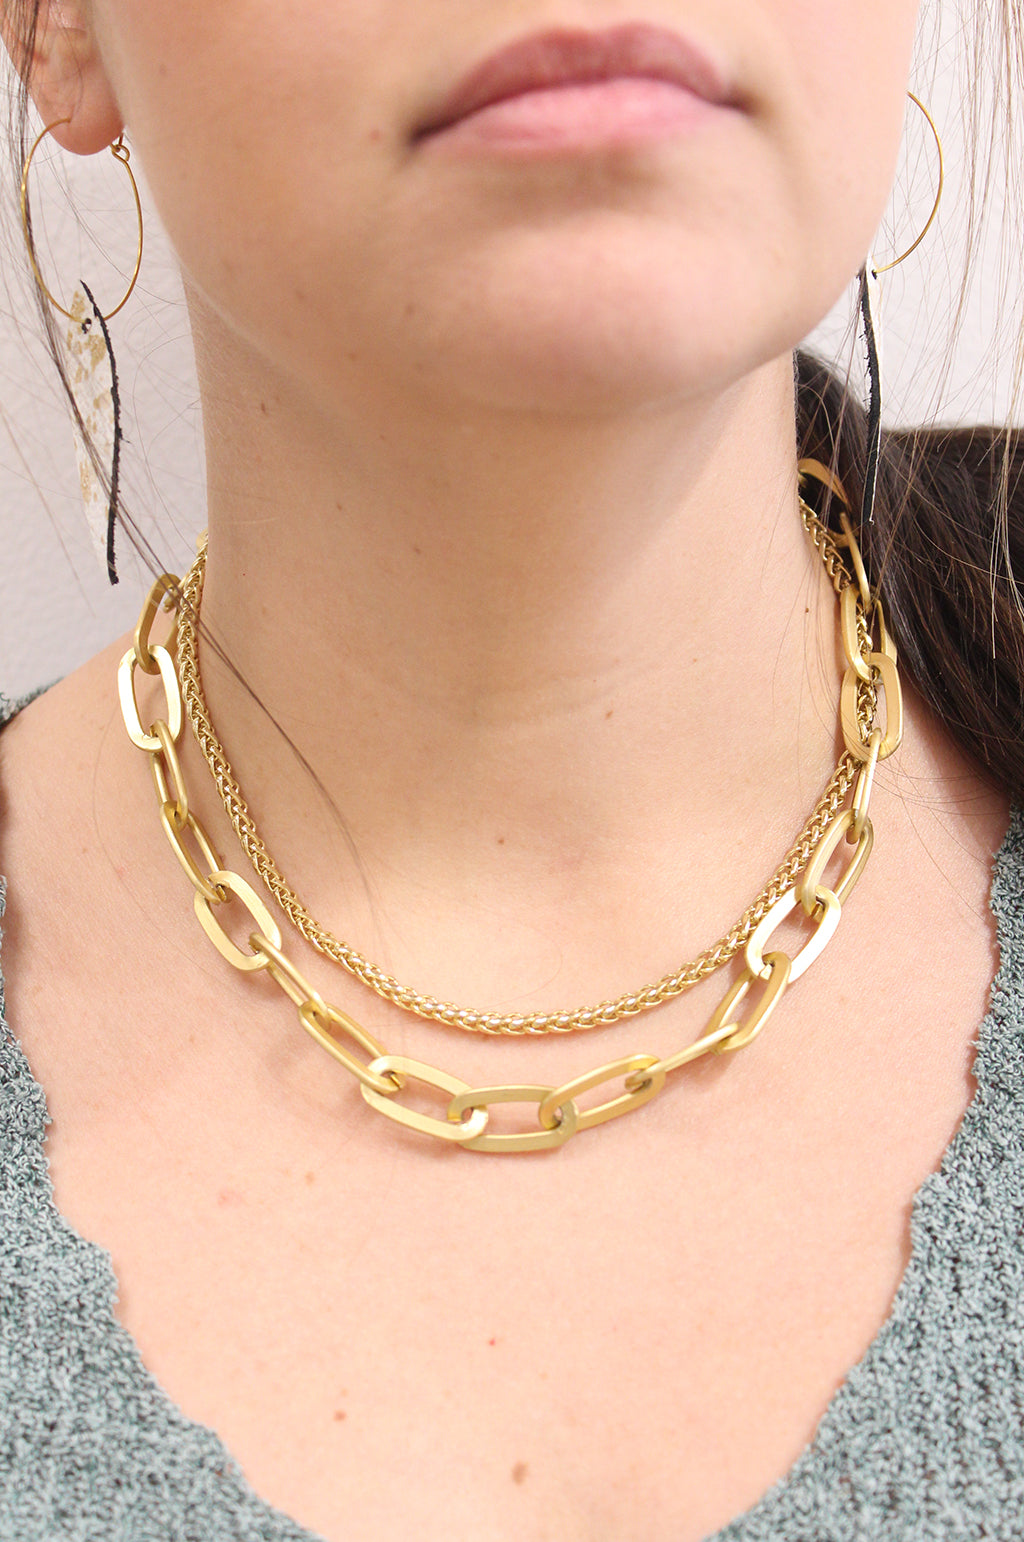 Chunky Paper Clip Chain Necklace by Annie Claire Designs - SoSis